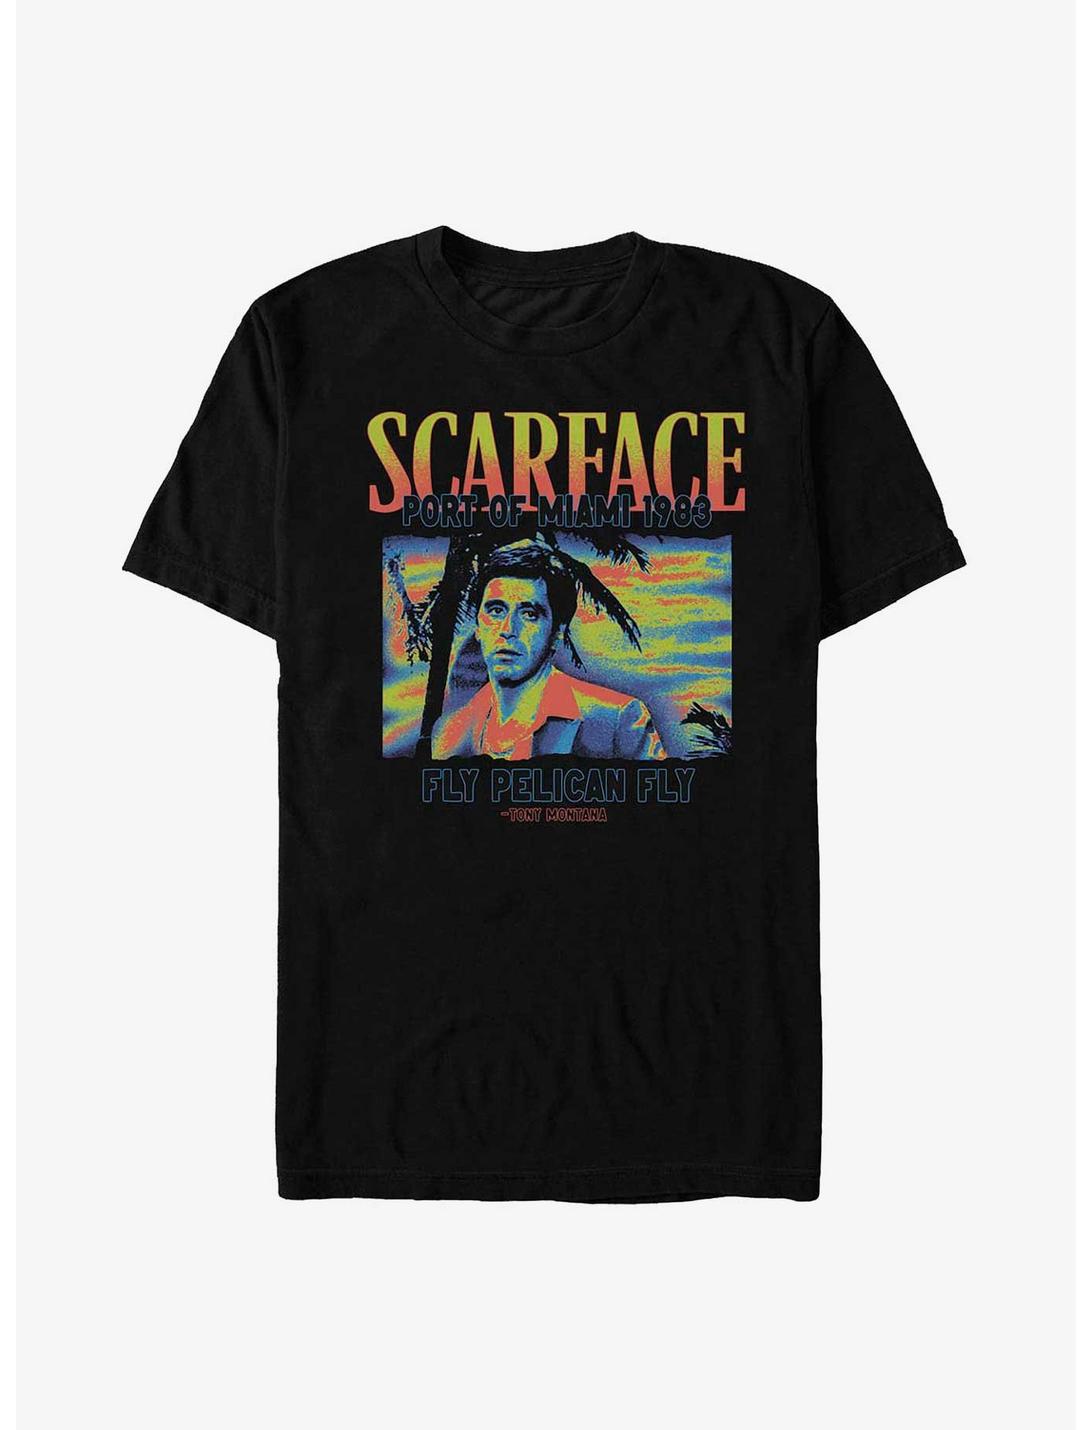 Scarface Fly Pelican T-Shirt, BLACK, hi-res